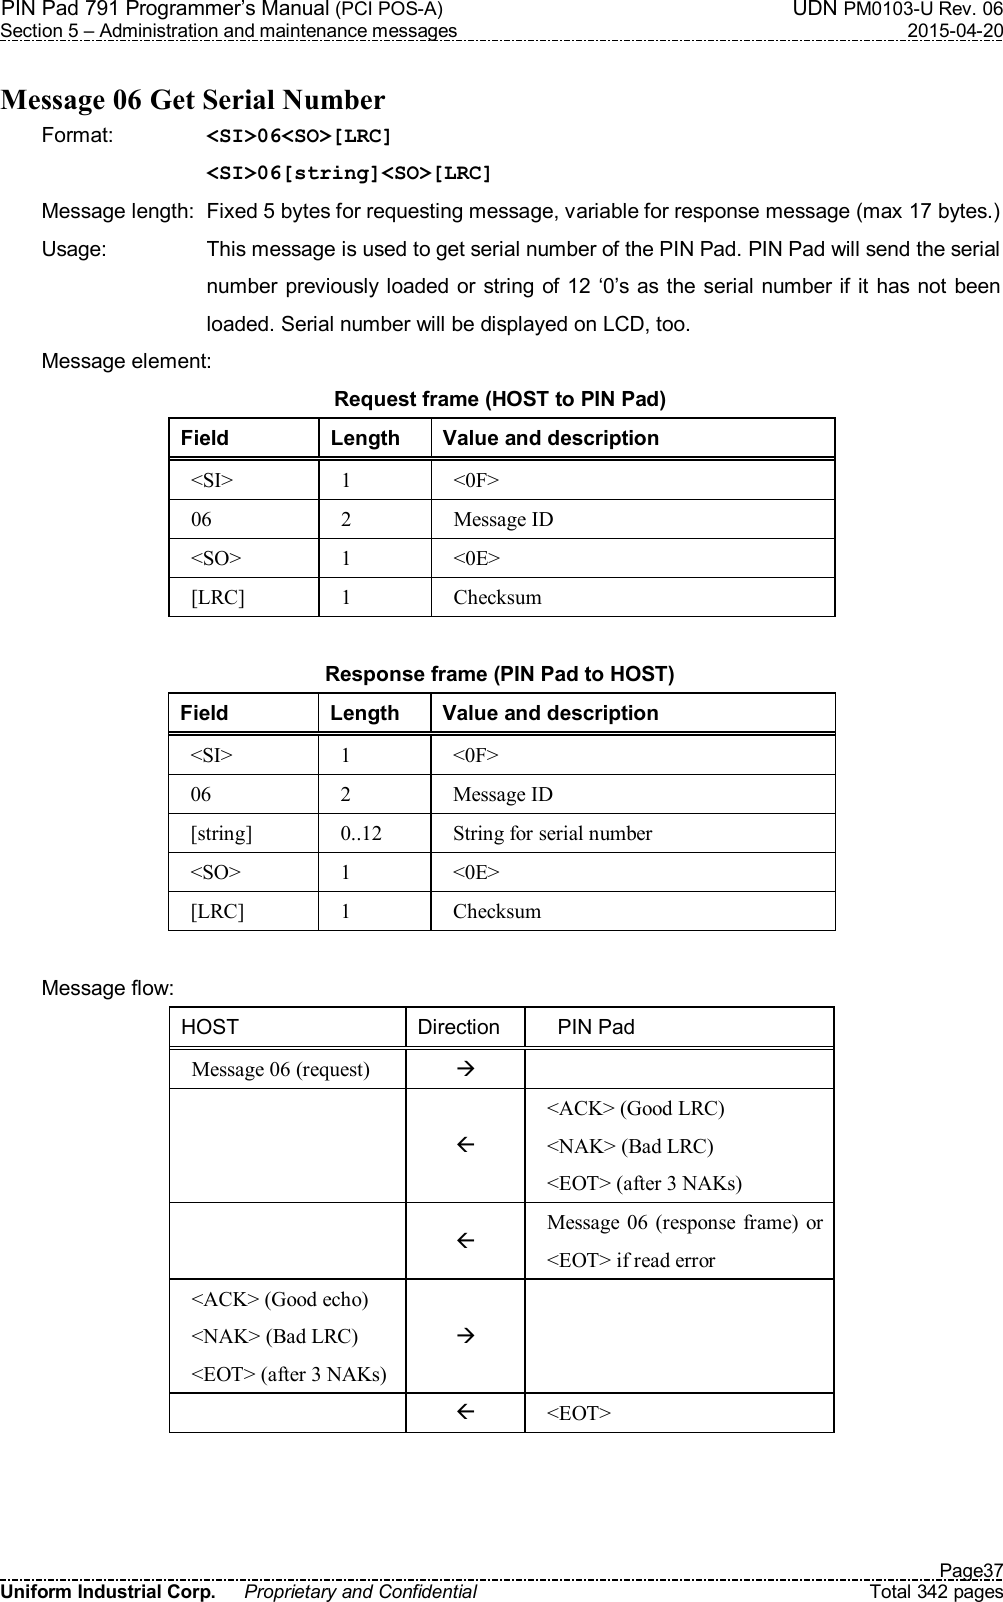 PIN Pad 791 Programmer’s Manual (PCI POS-A)  UDN PM0103-U Rev. 06 Section 5 – Administration and maintenance messages  2015-04-20   Page37 Uniform Industrial Corp.  Proprietary and Confidential  Total 342 pages  Message 06 Get Serial Number Format:    &lt;SI&gt;06&lt;SO&gt;[LRC] &lt;SI&gt;06[string]&lt;SO&gt;[LRC] Message length:  Fixed 5 bytes for requesting message, variable for response message (max 17 bytes.) Usage:  This message is used to get serial number of the PIN Pad. PIN Pad will send the serial number previously loaded or string of 12 ‘0’s as the serial number if it has not been loaded. Serial number will be displayed on LCD, too. Message element: Request frame (HOST to PIN Pad) Field  Length  Value and description &lt;SI&gt;  1  &lt;0F&gt; 06  2  Message ID &lt;SO&gt;  1  &lt;0E&gt; [LRC]  1  Checksum  Response frame (PIN Pad to HOST) Field  Length  Value and description &lt;SI&gt;  1  &lt;0F&gt; 06  2  Message ID [string]  0..12  String for serial number &lt;SO&gt;  1  &lt;0E&gt; [LRC]  1  Checksum  Message flow: HOST  Direction      PIN Pad Message 06 (request)      &lt;ACK&gt; (Good LRC) &lt;NAK&gt; (Bad LRC) &lt;EOT&gt; (after 3 NAKs)   Message 06  (response frame) or &lt;EOT&gt; if read error &lt;ACK&gt; (Good echo) &lt;NAK&gt; (Bad LRC) &lt;EOT&gt; (after 3 NAKs)     &lt;EOT&gt;  